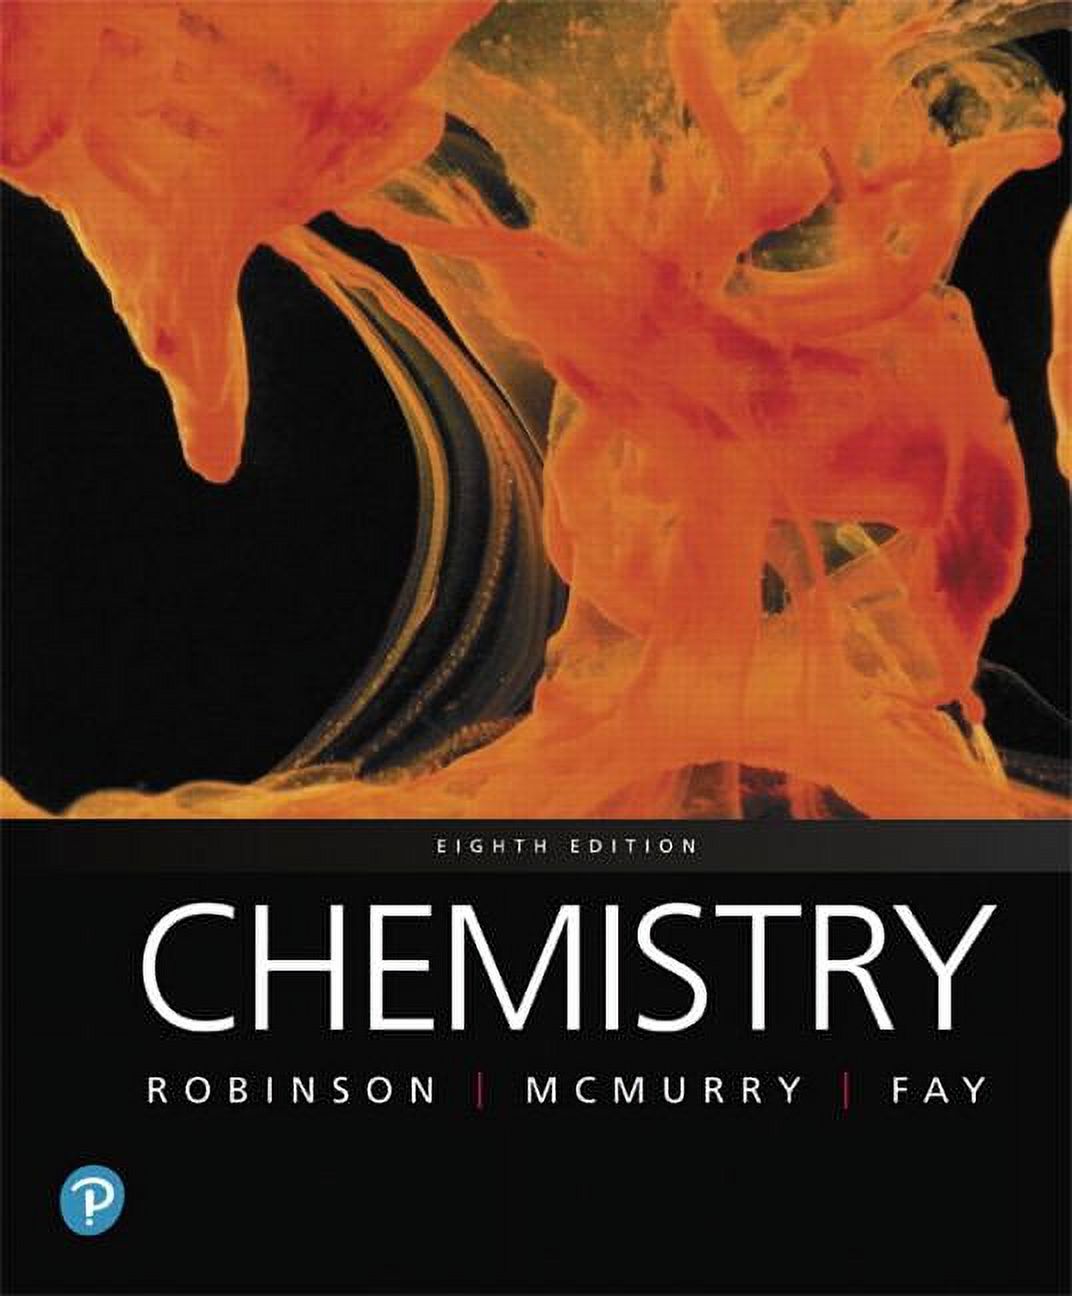 Chemistry (Hardcover) - image 1 of 1